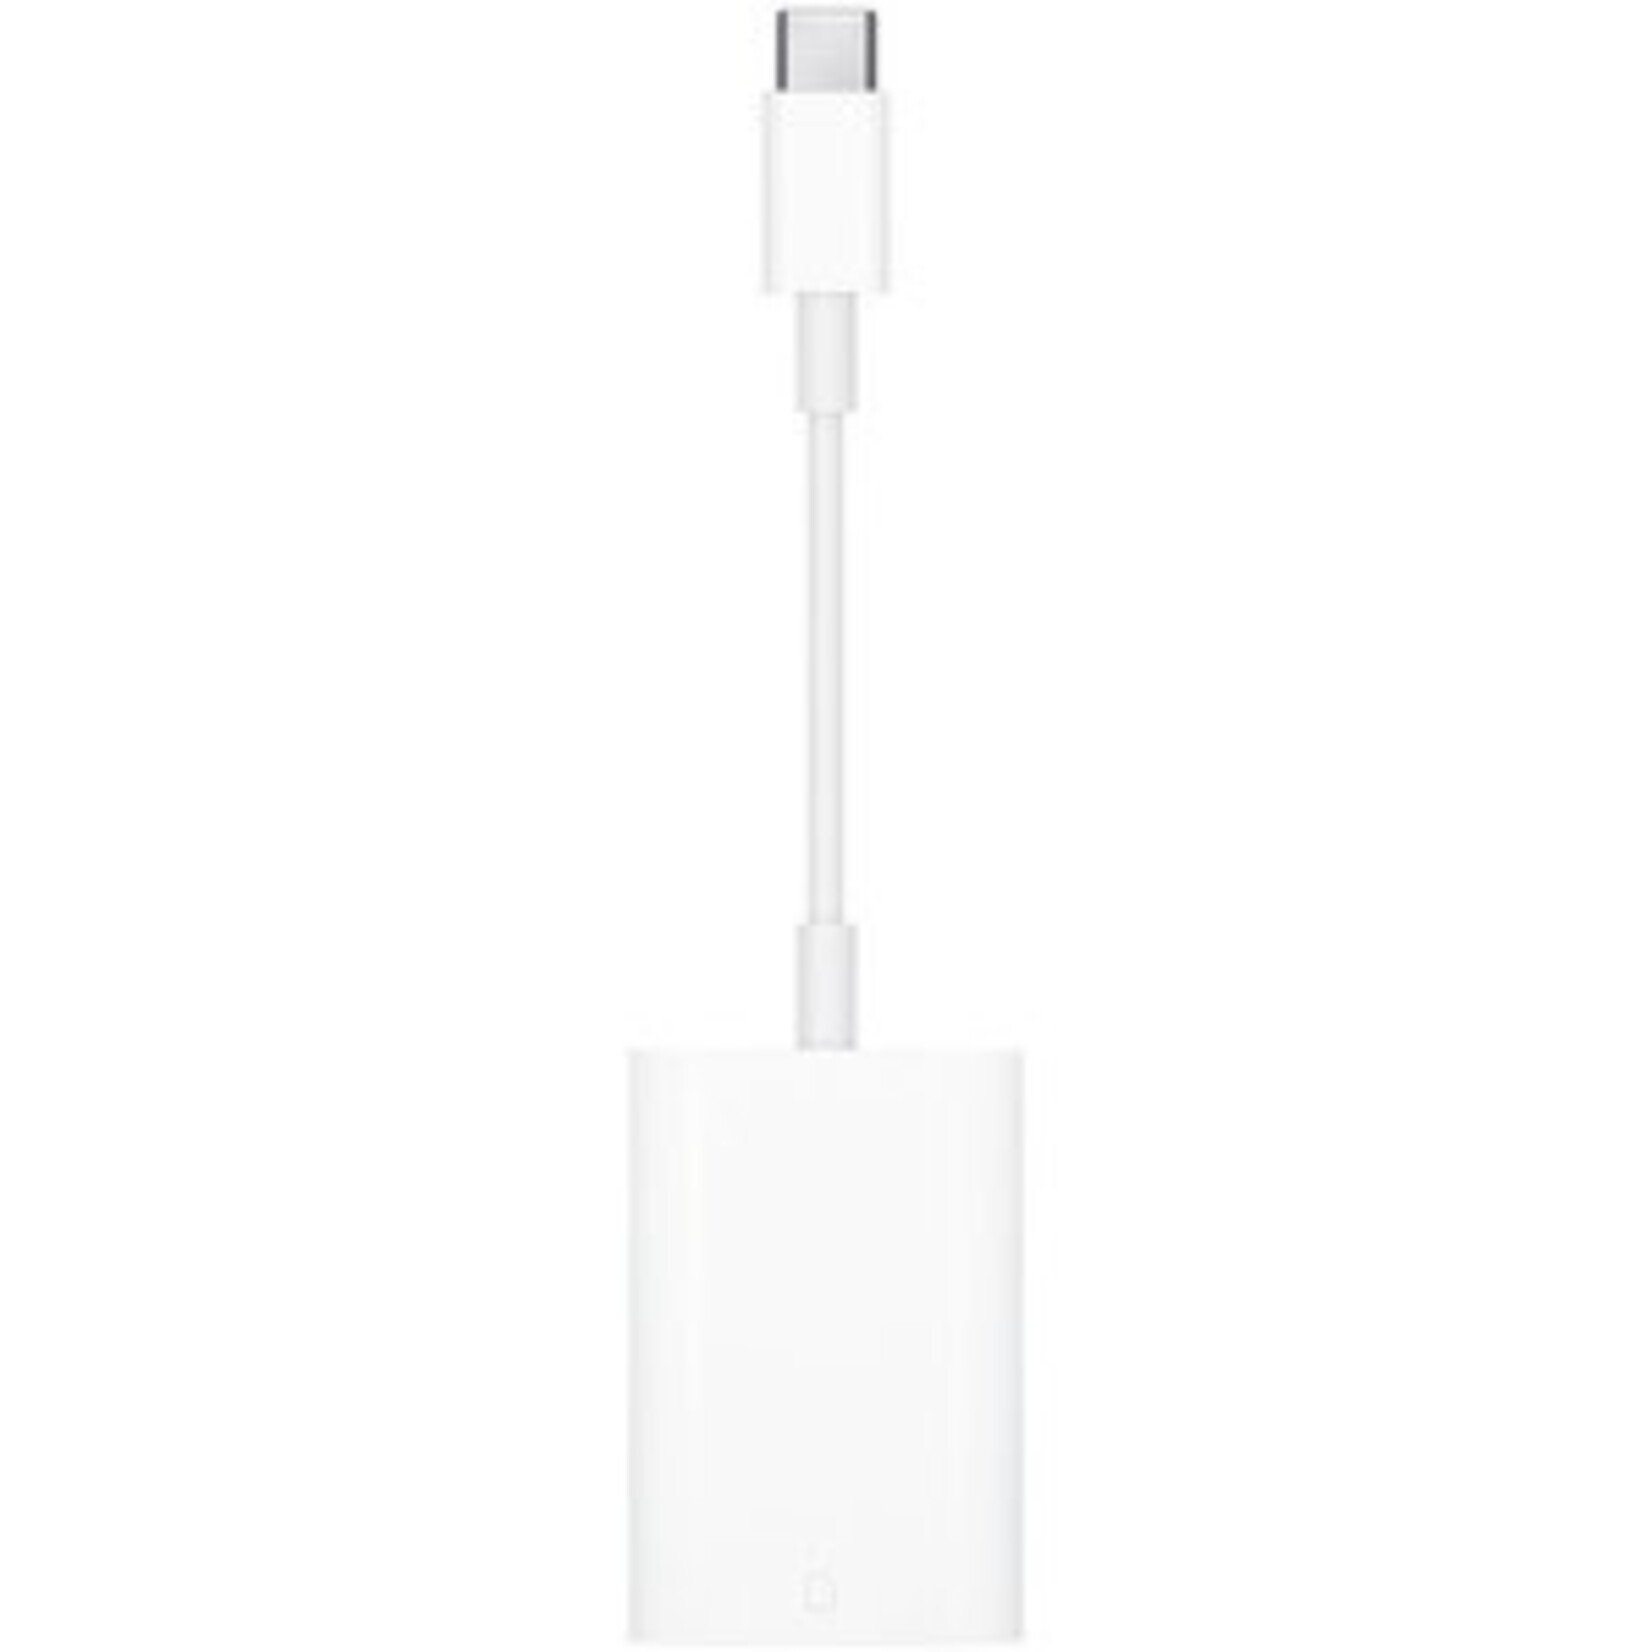 Apple USB-C to SD Card Adapter